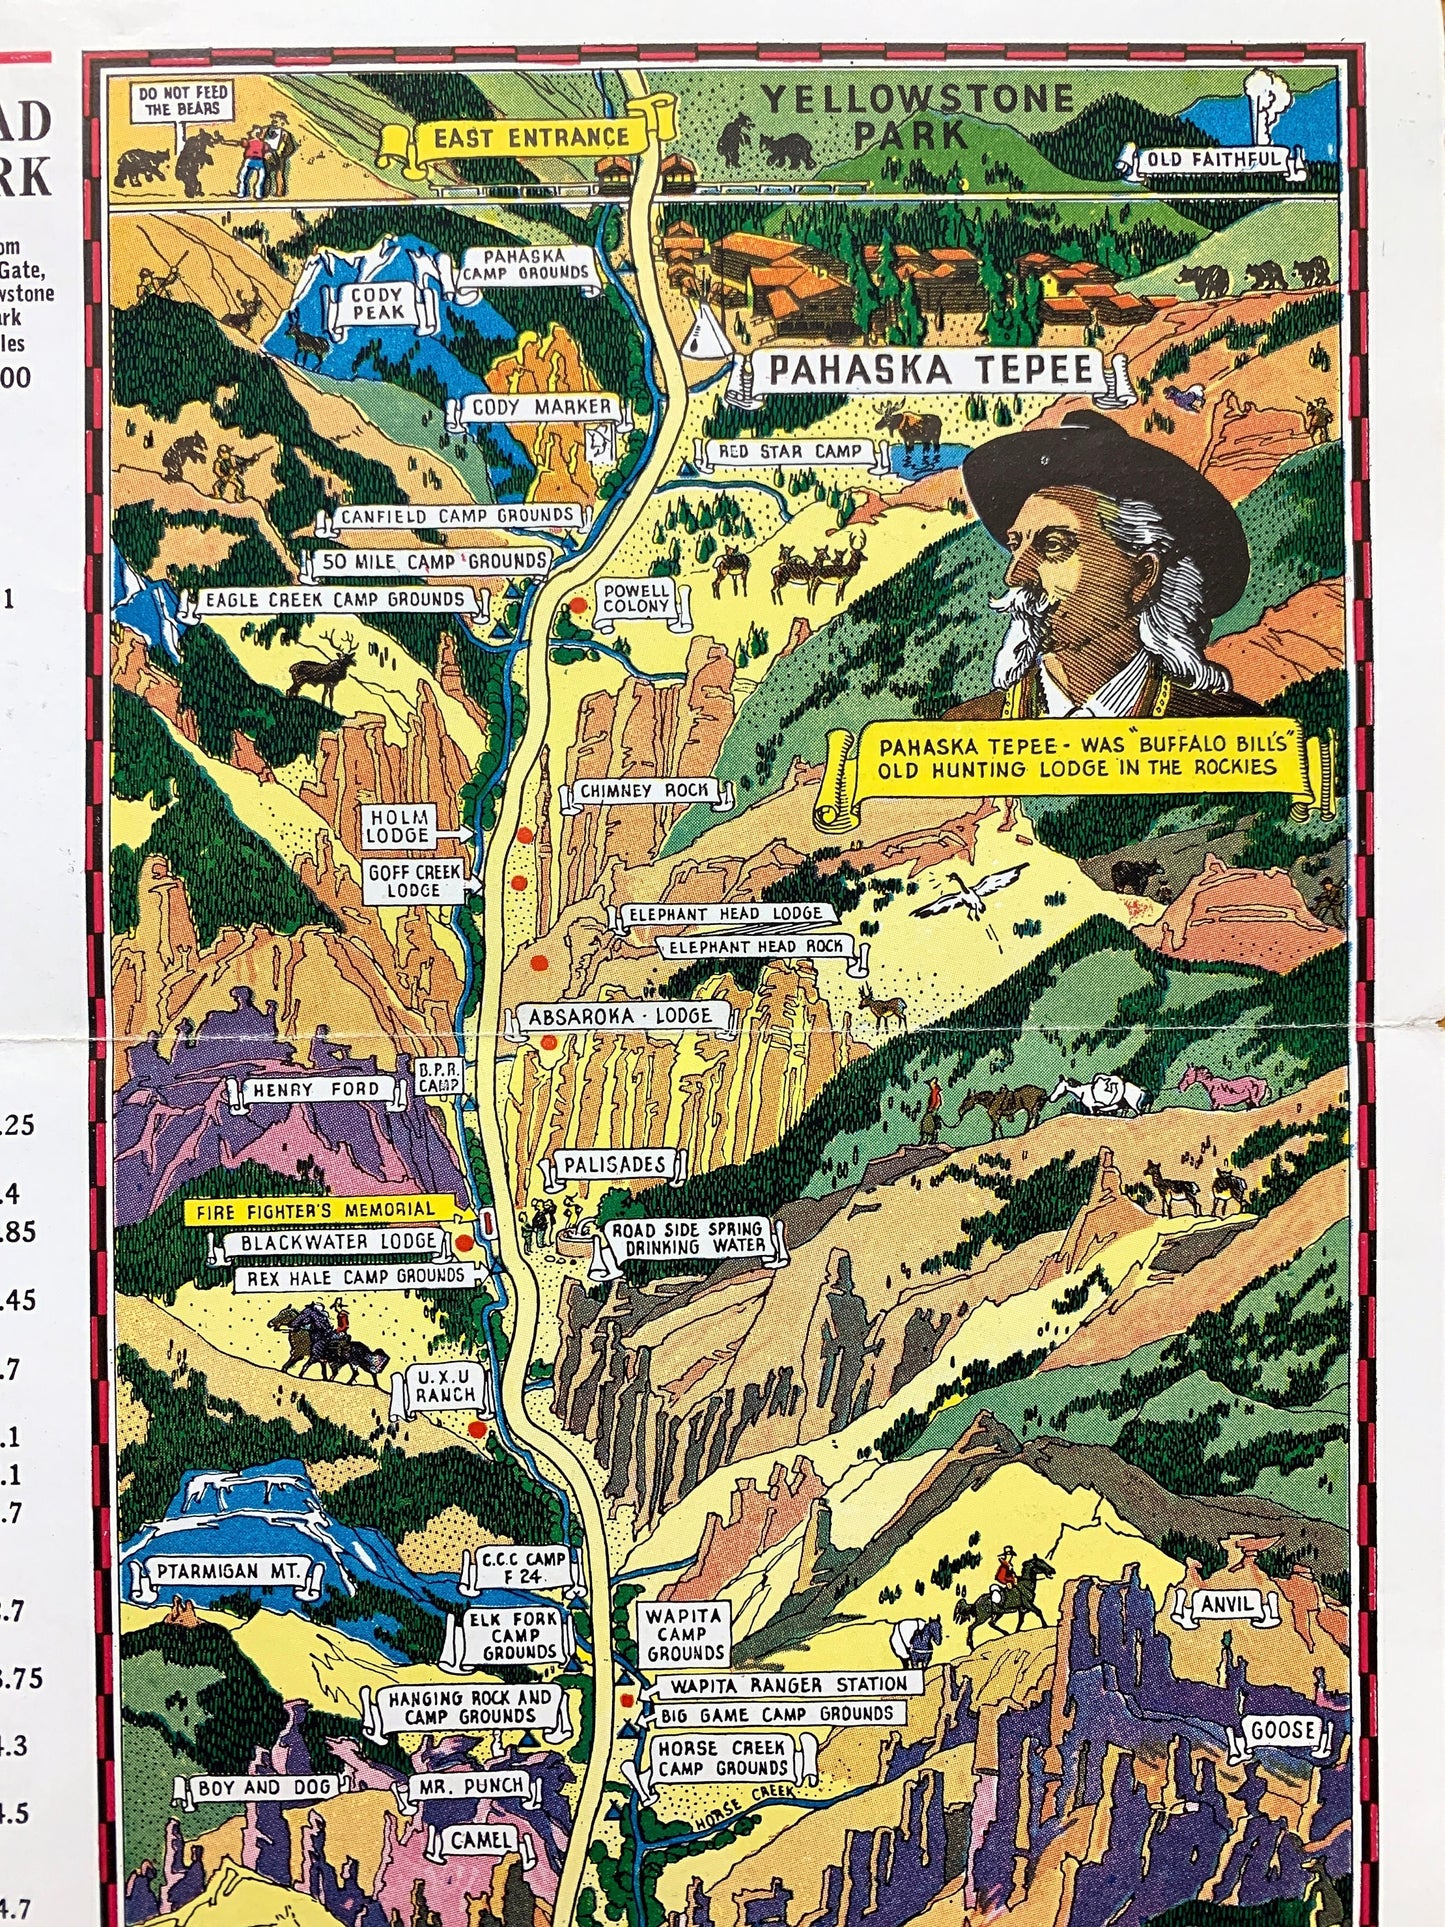 Antique Yellowstone National Park, Wyoming 1920's Edward T. Grigware Illustration Tourist Map – Cody Road, Old Faithful, Shoshone Forest, WY